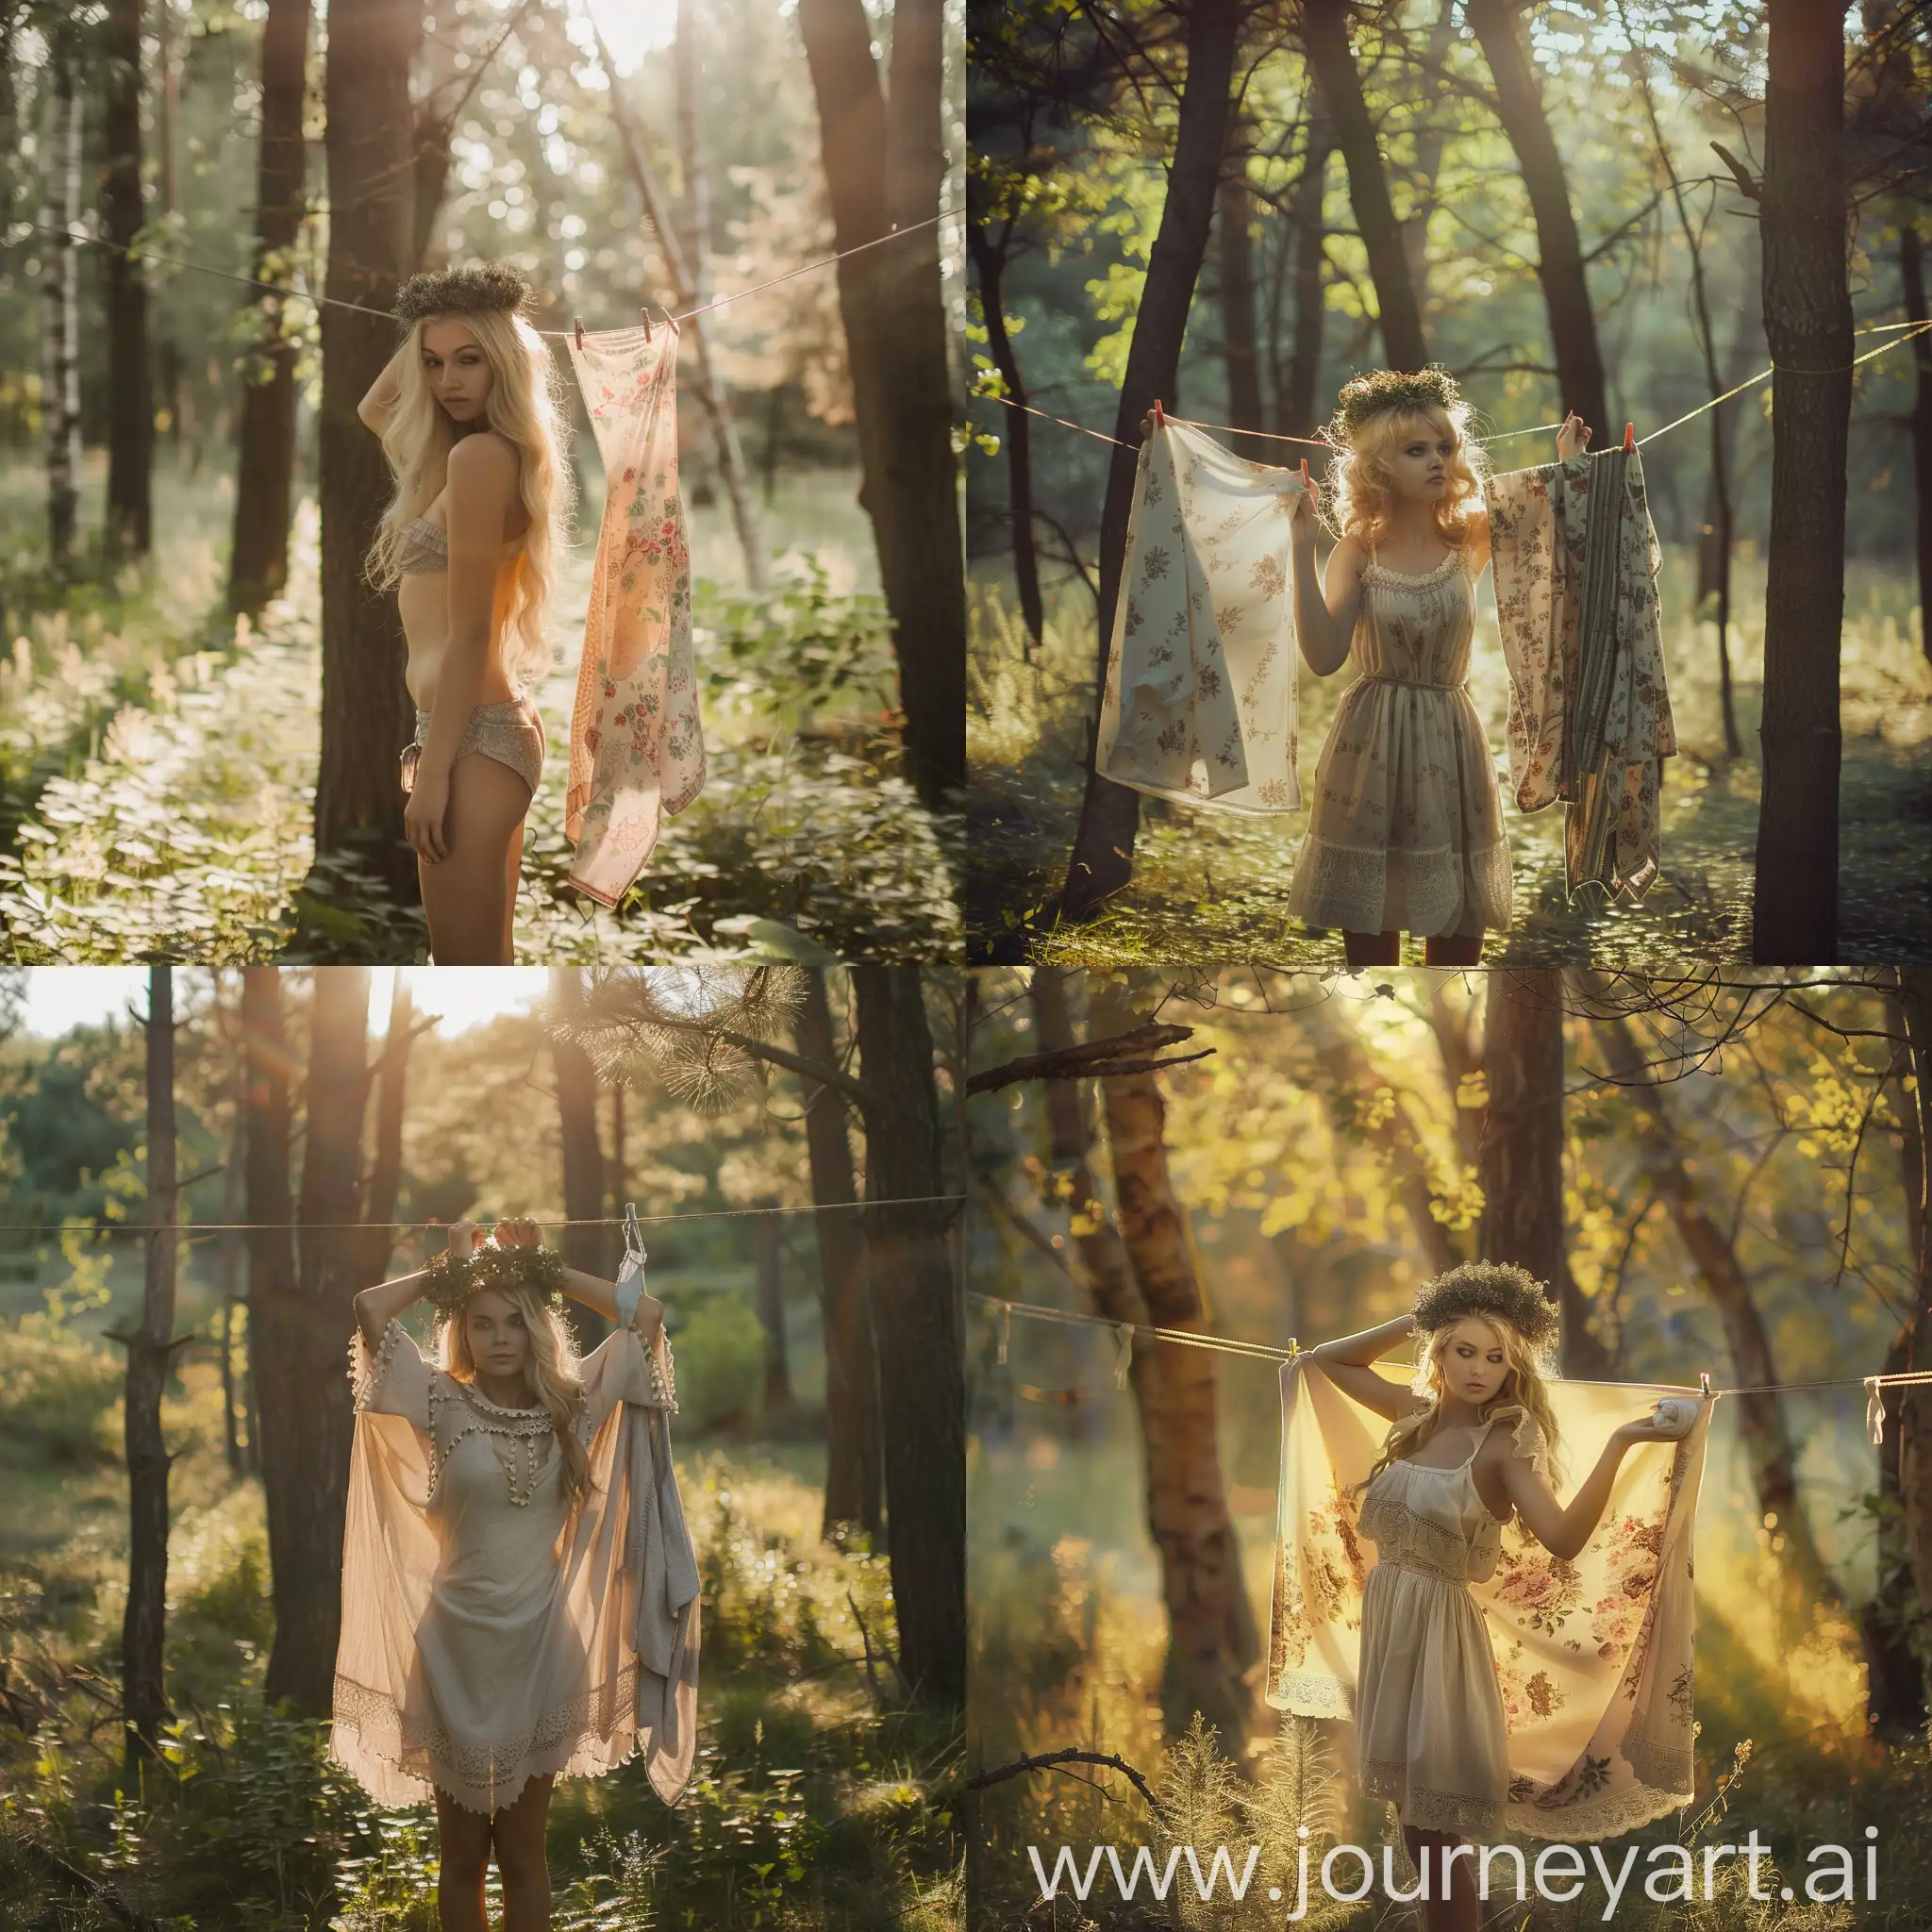 Vintage-Woman-Hanging-Laundry-in-Sunlit-Forest-Meadow